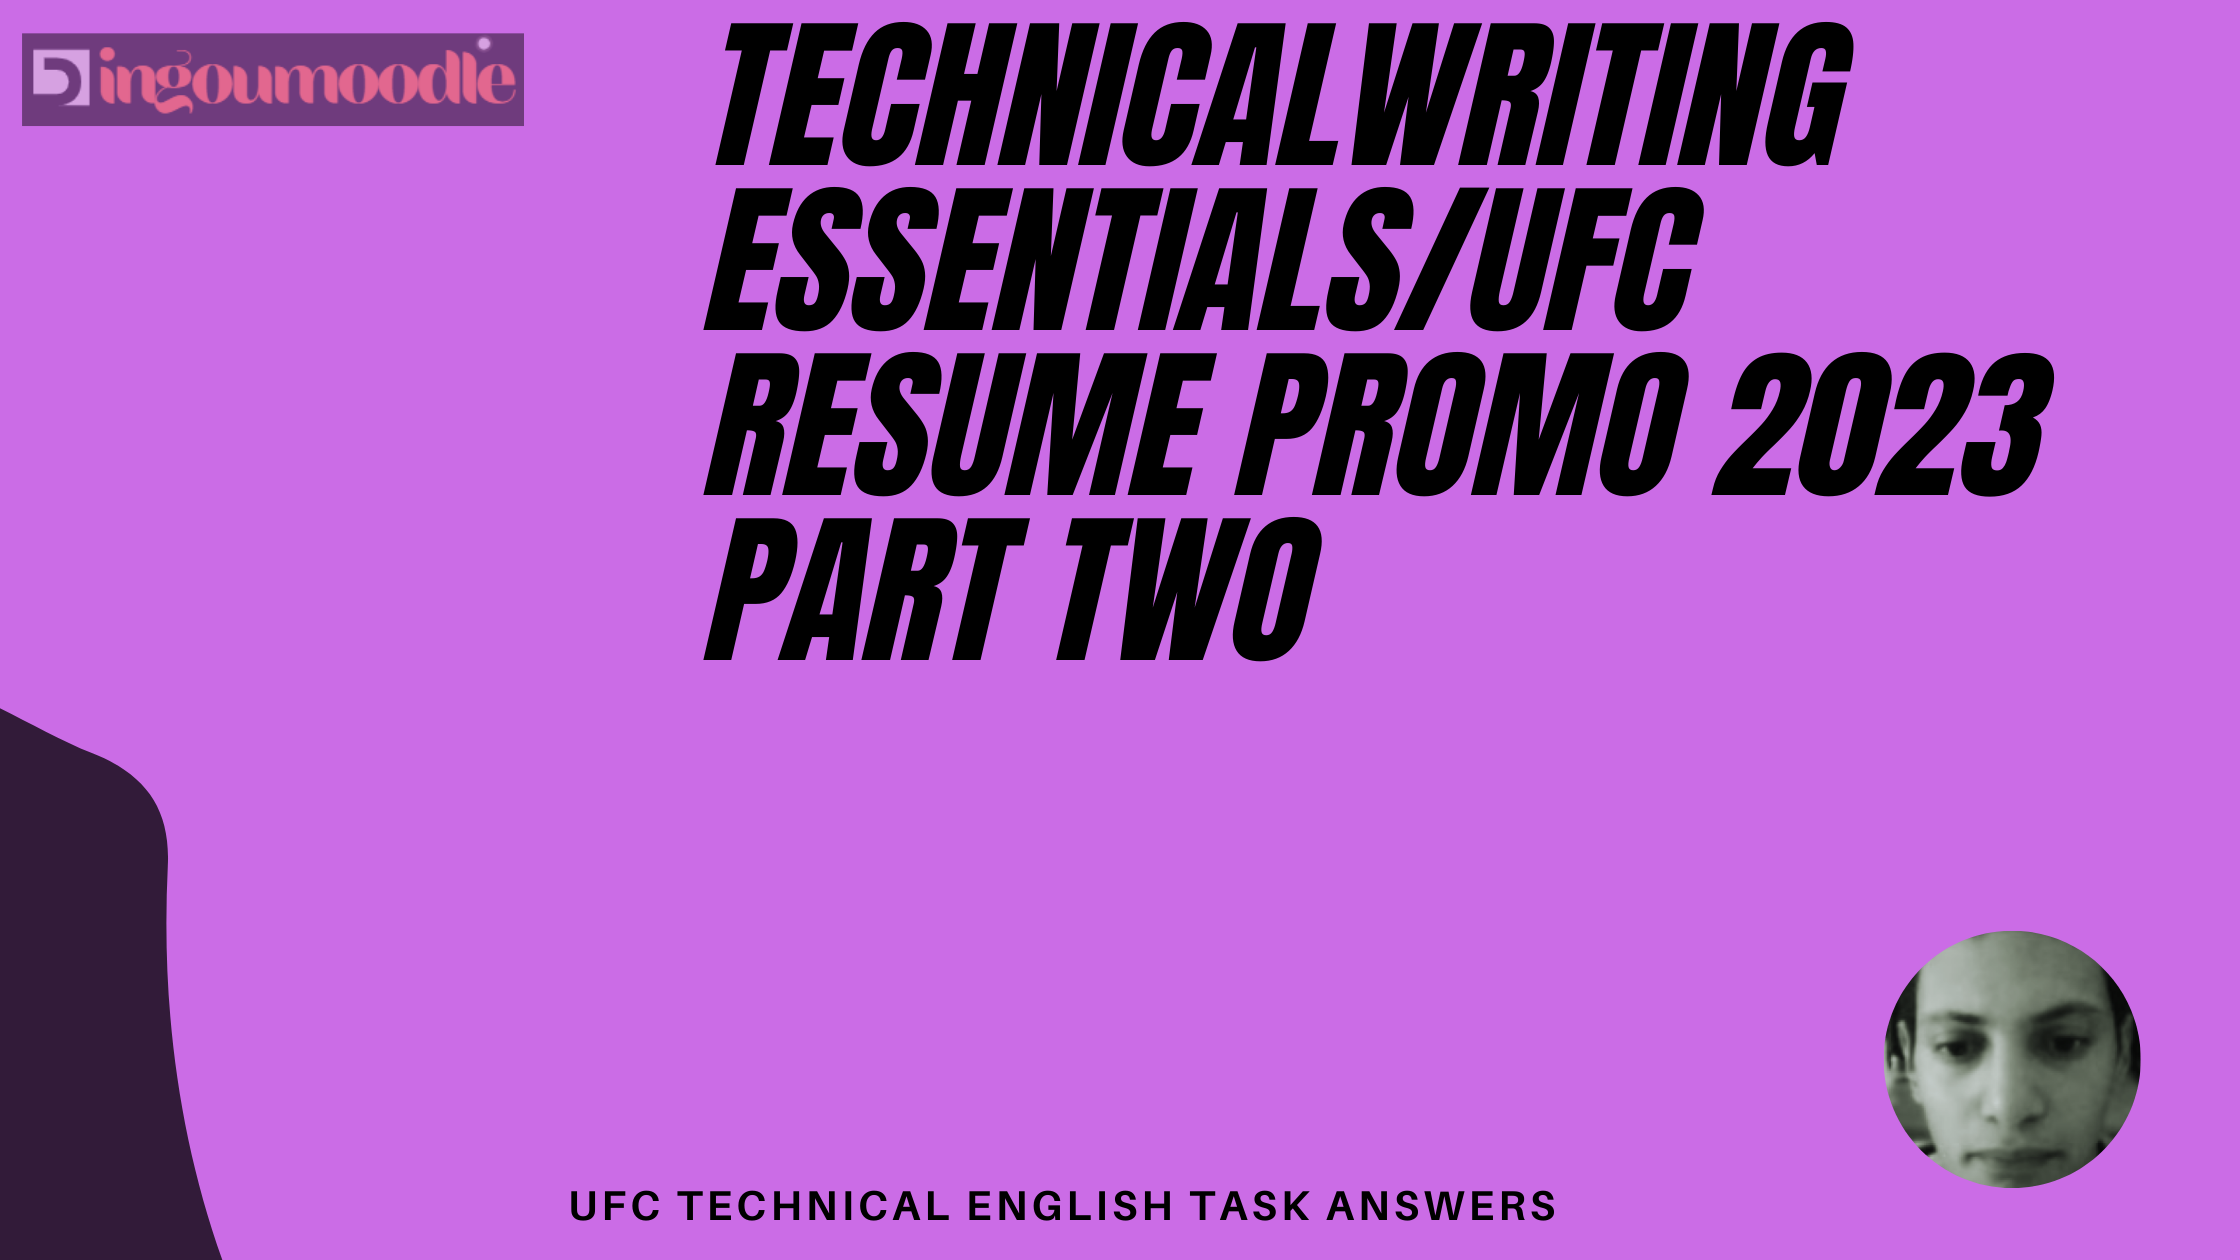 Technical Writing Essentials☹Part two/ résumer promo 2023